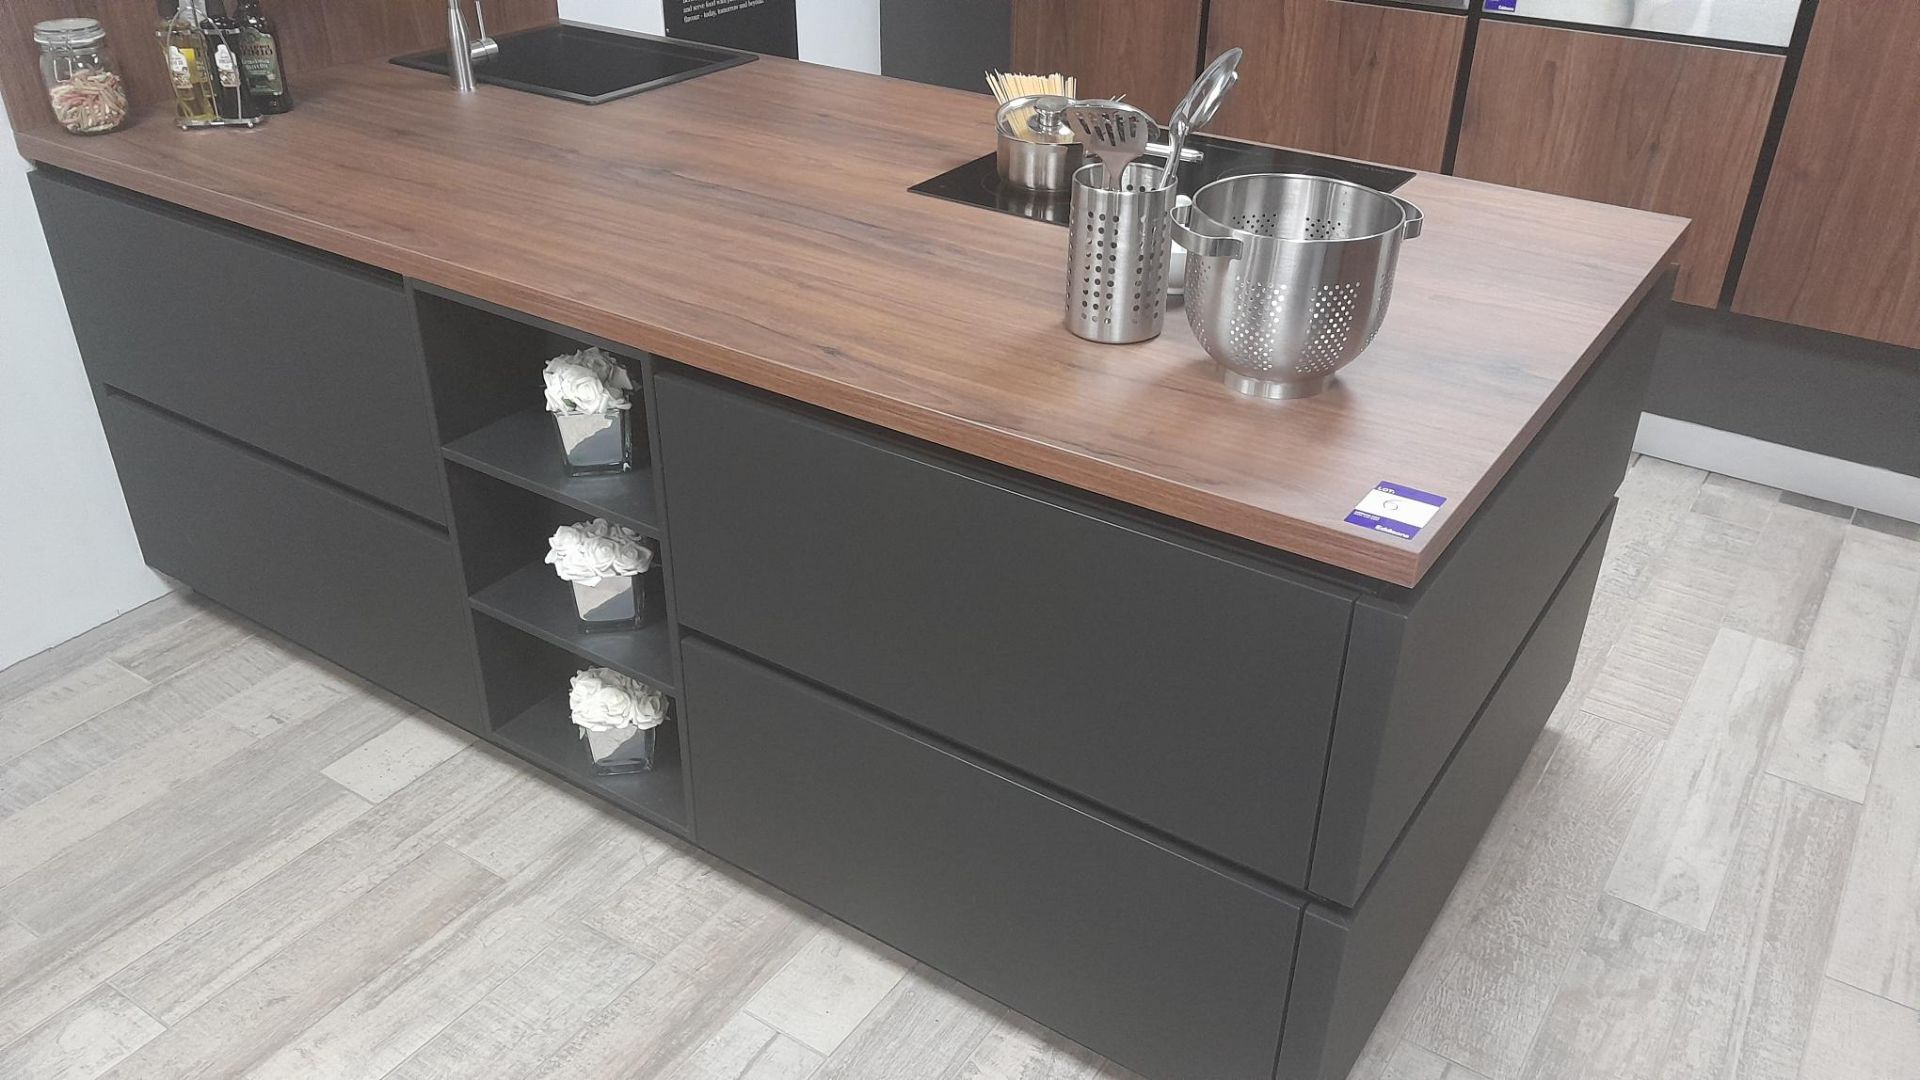 Hacker Top Soft Black and Walnut handleless ex display kitchen, with Schock undermount sink and tap. - Image 2 of 7